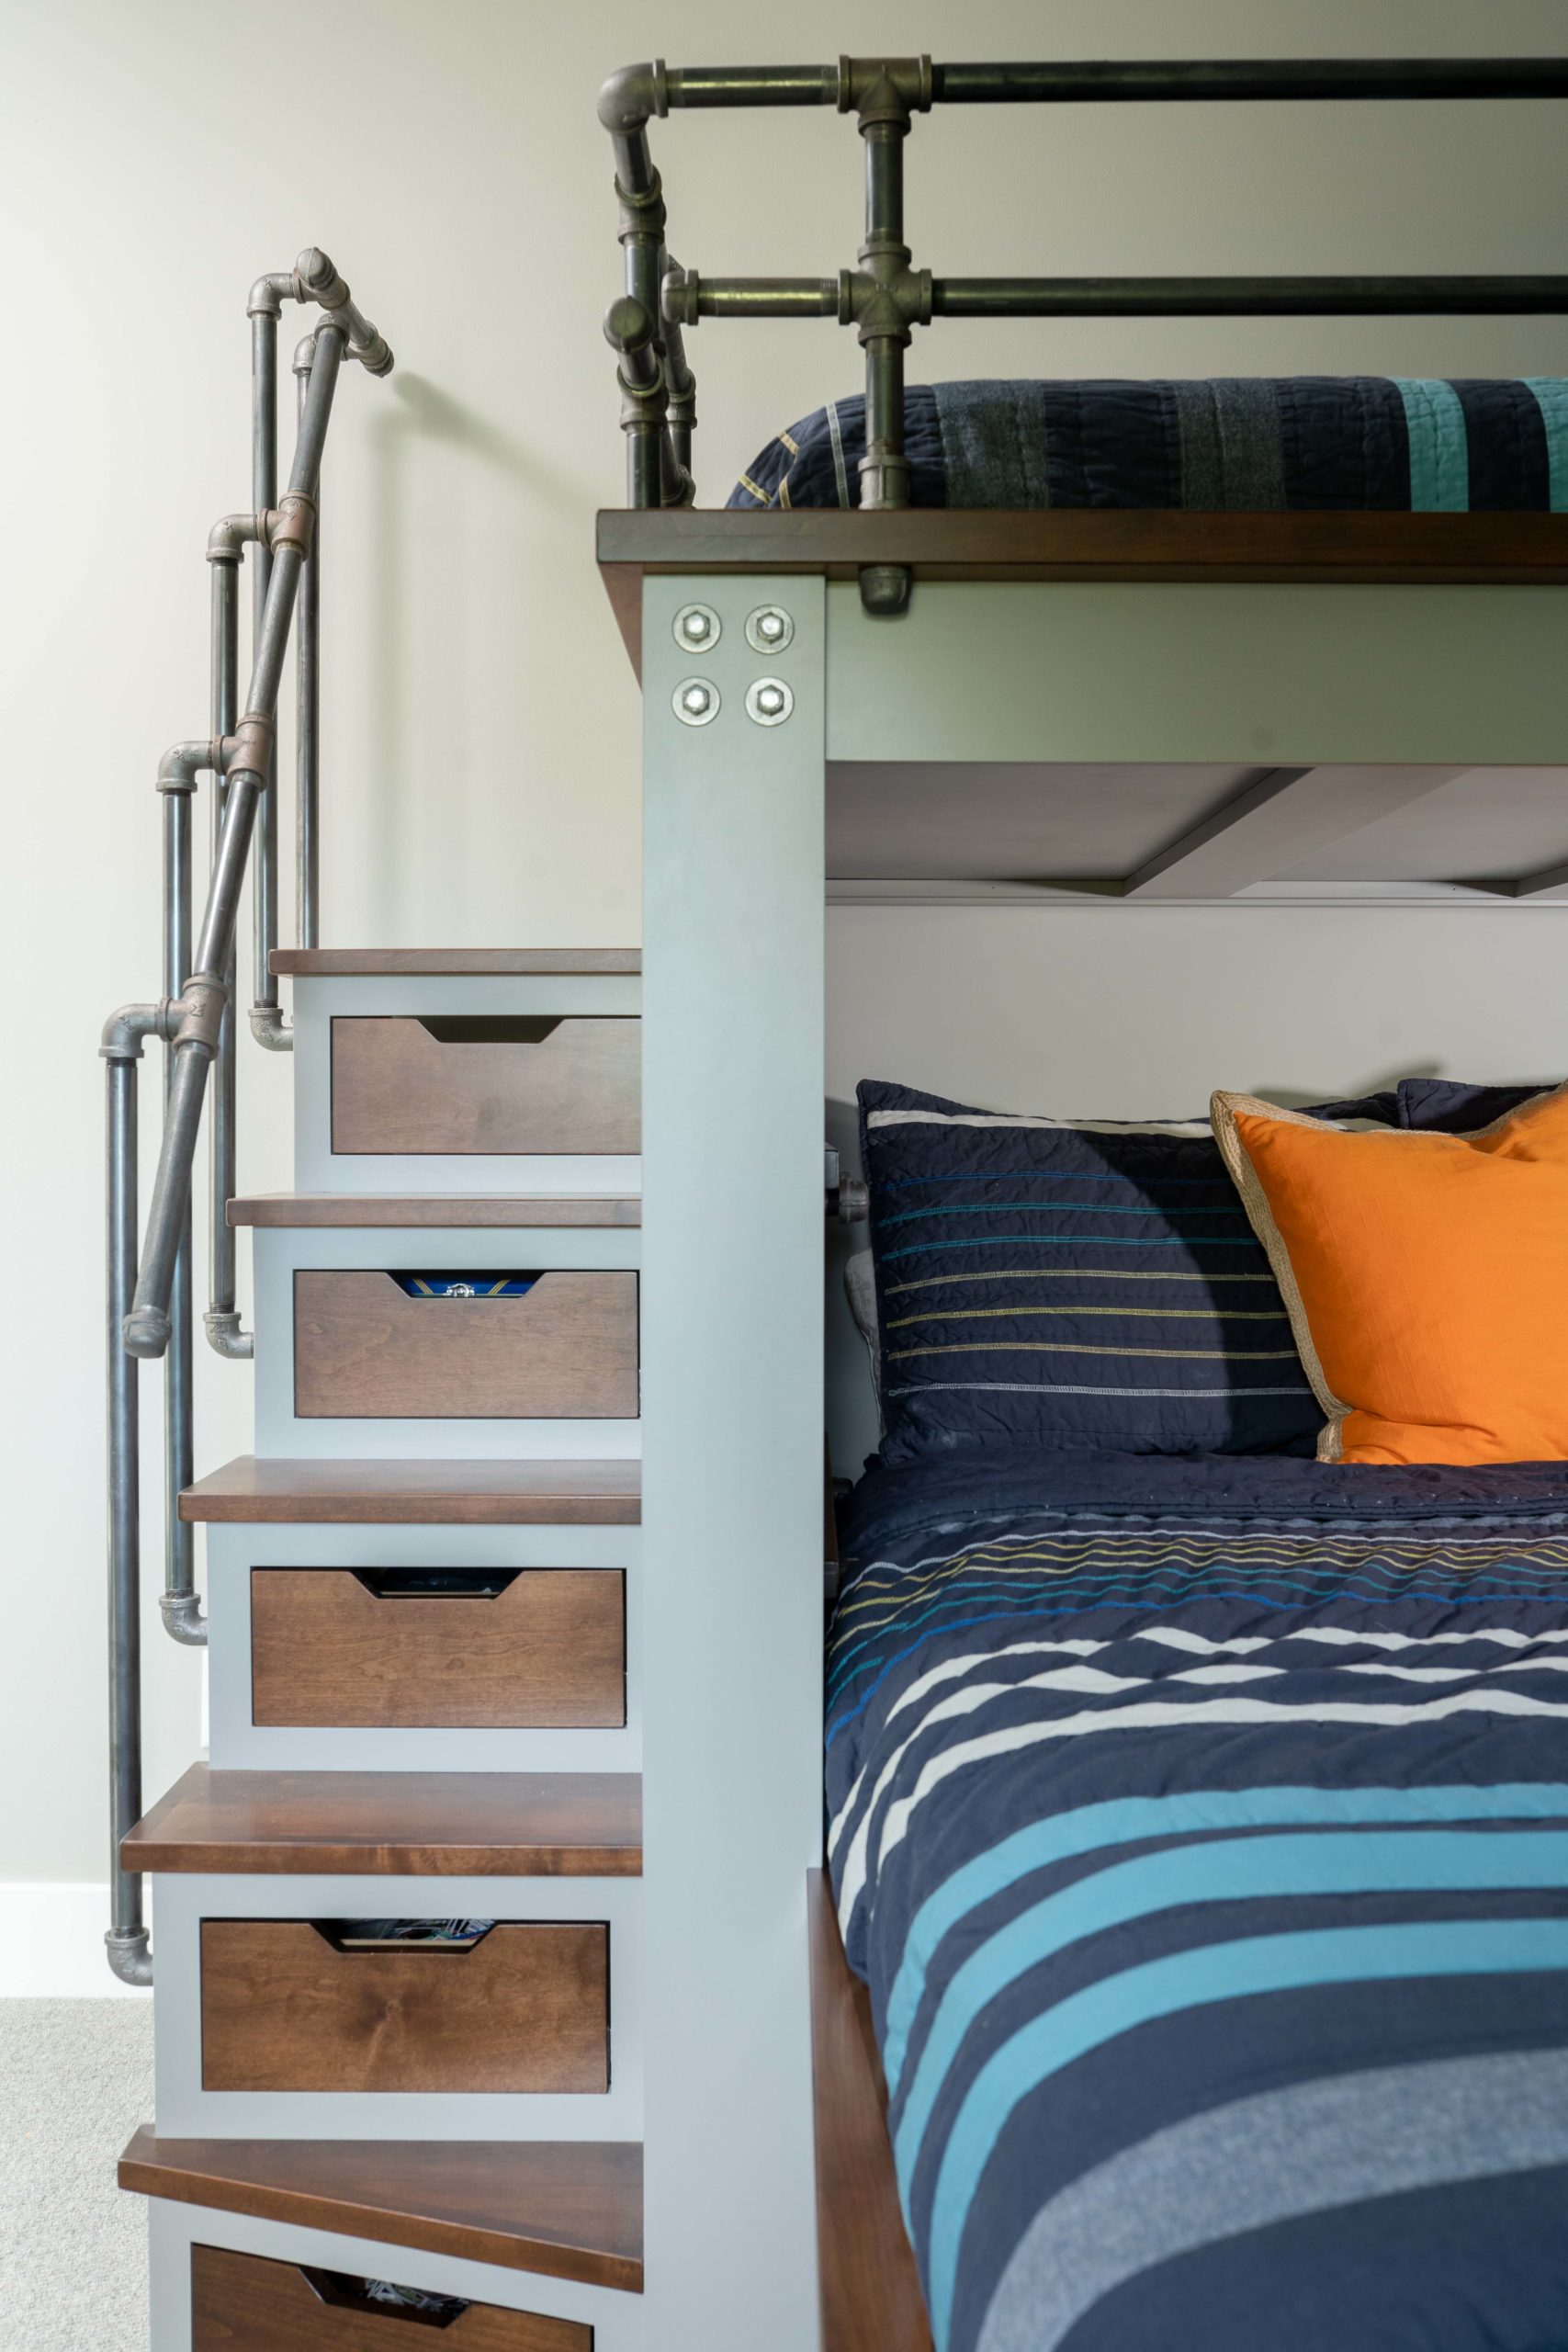 A bunk bed with stairs and drawers from Kitchens portfolio.